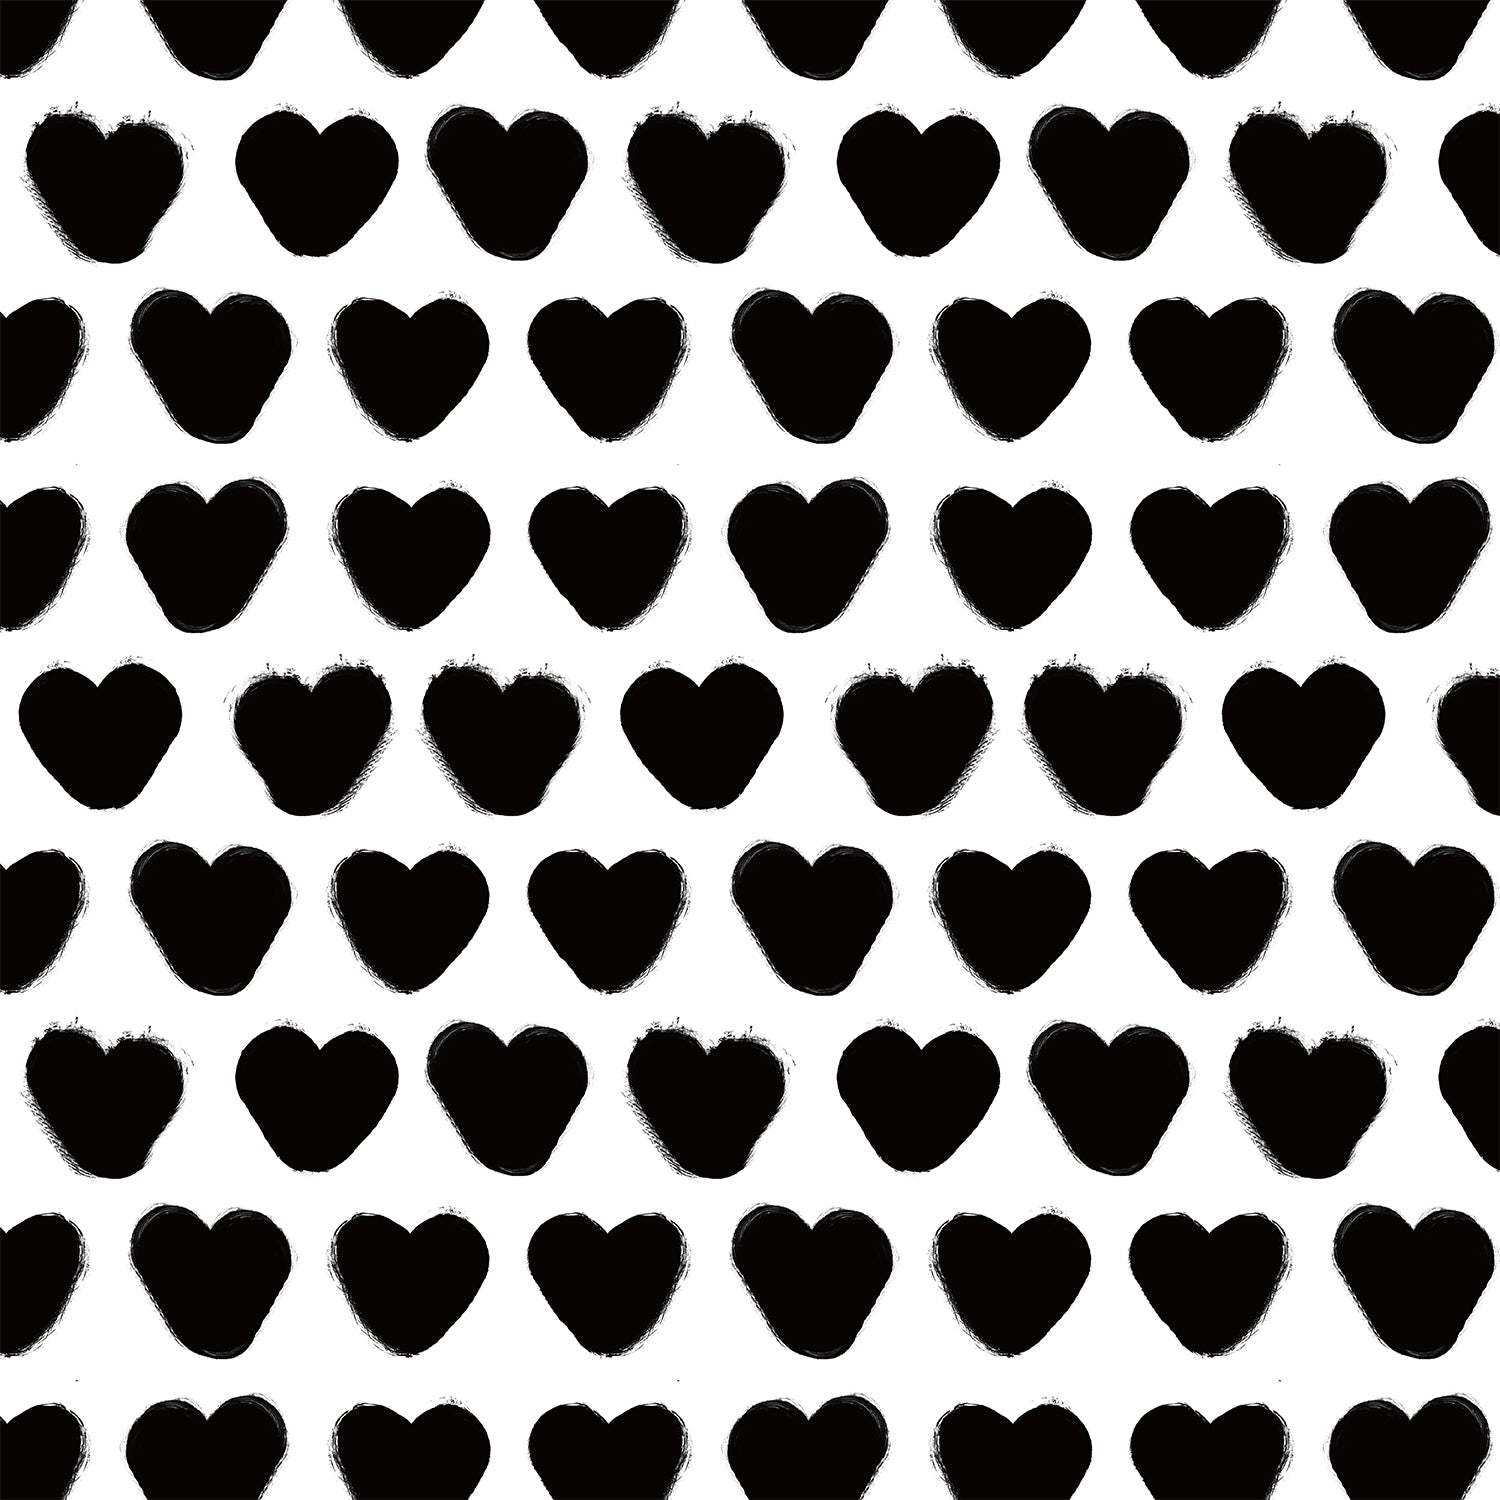 Black and White Love Heart Flat Wrapping Paper Sheet Wholesale Wraphaholic